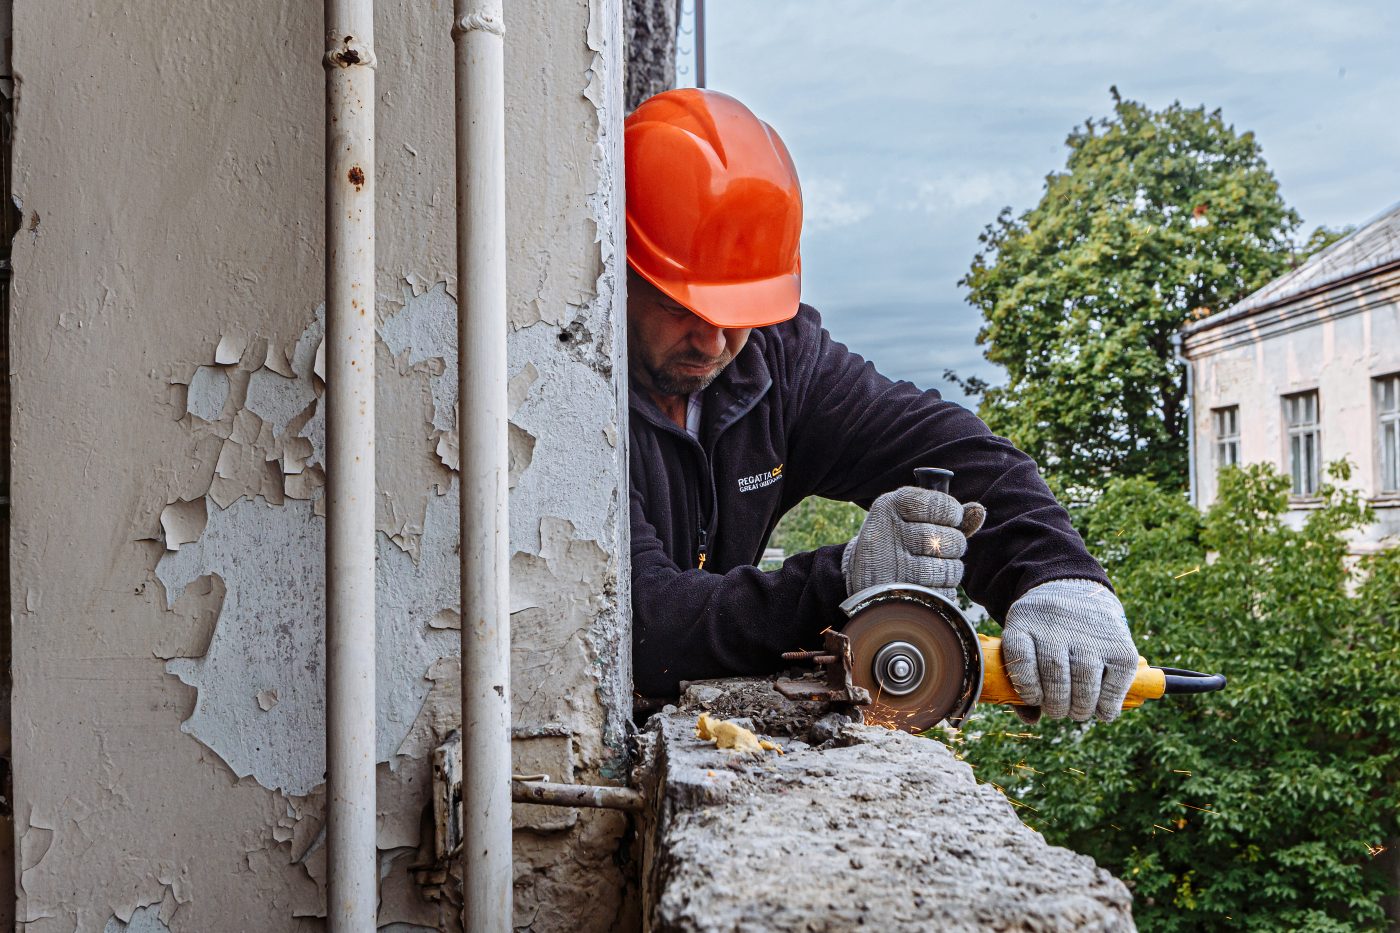 Photo: An employee of a construction company from Melitopol works on conversion of the office space of the former Tysa engineering plant into residential apartments, Uzhhorod, Zakarpattia Region, western Ukraine. Credit: Serhii Hudak via Reuters Connect